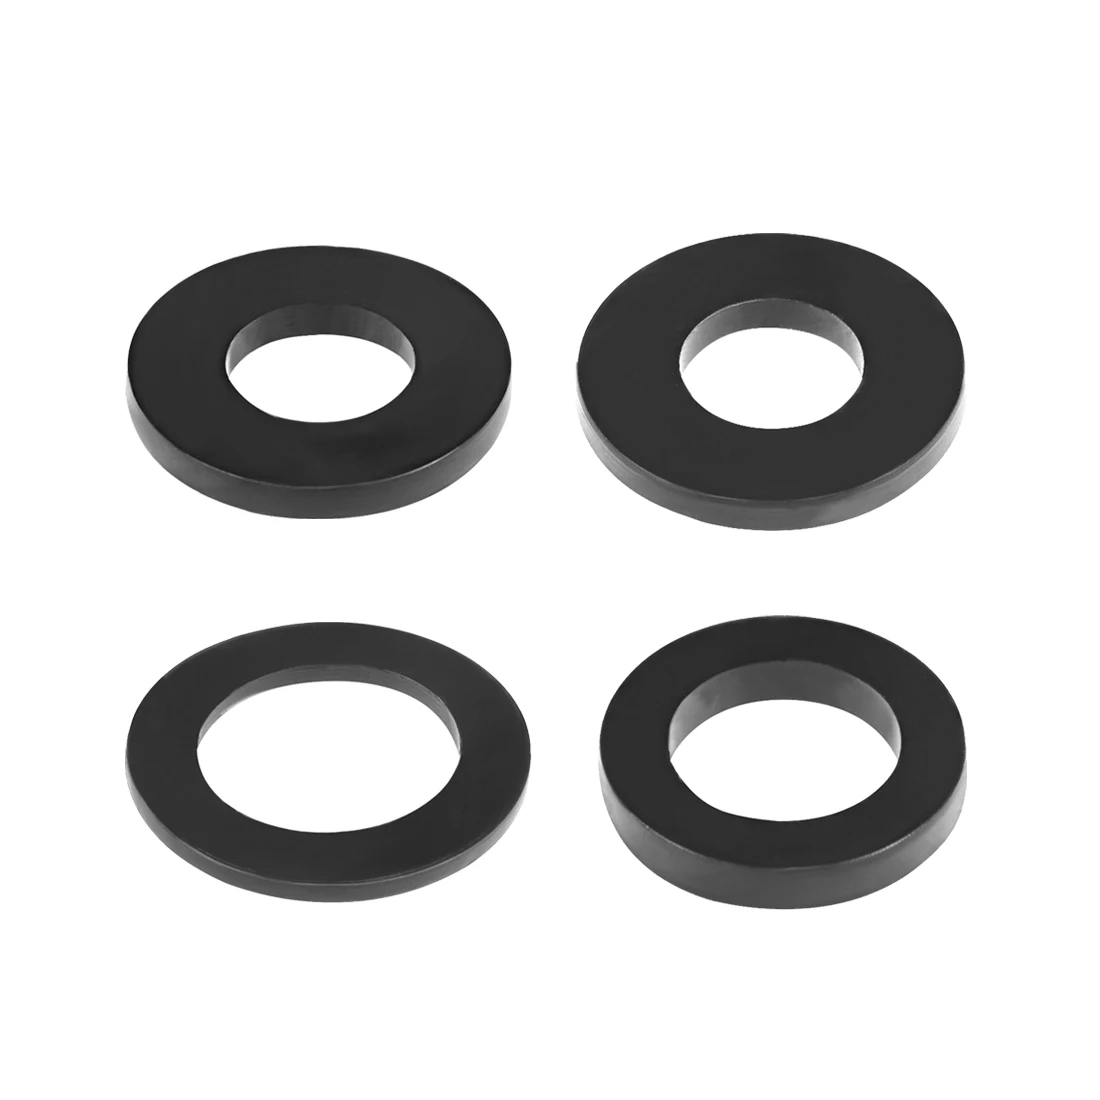 

uxcell Rubber Flat Washers 3-31mm Inner Diameter 7-45mm OD 1.2-4.5mm Thick Gaskets to Pipe Valve Hose Nut Plumbing Repair